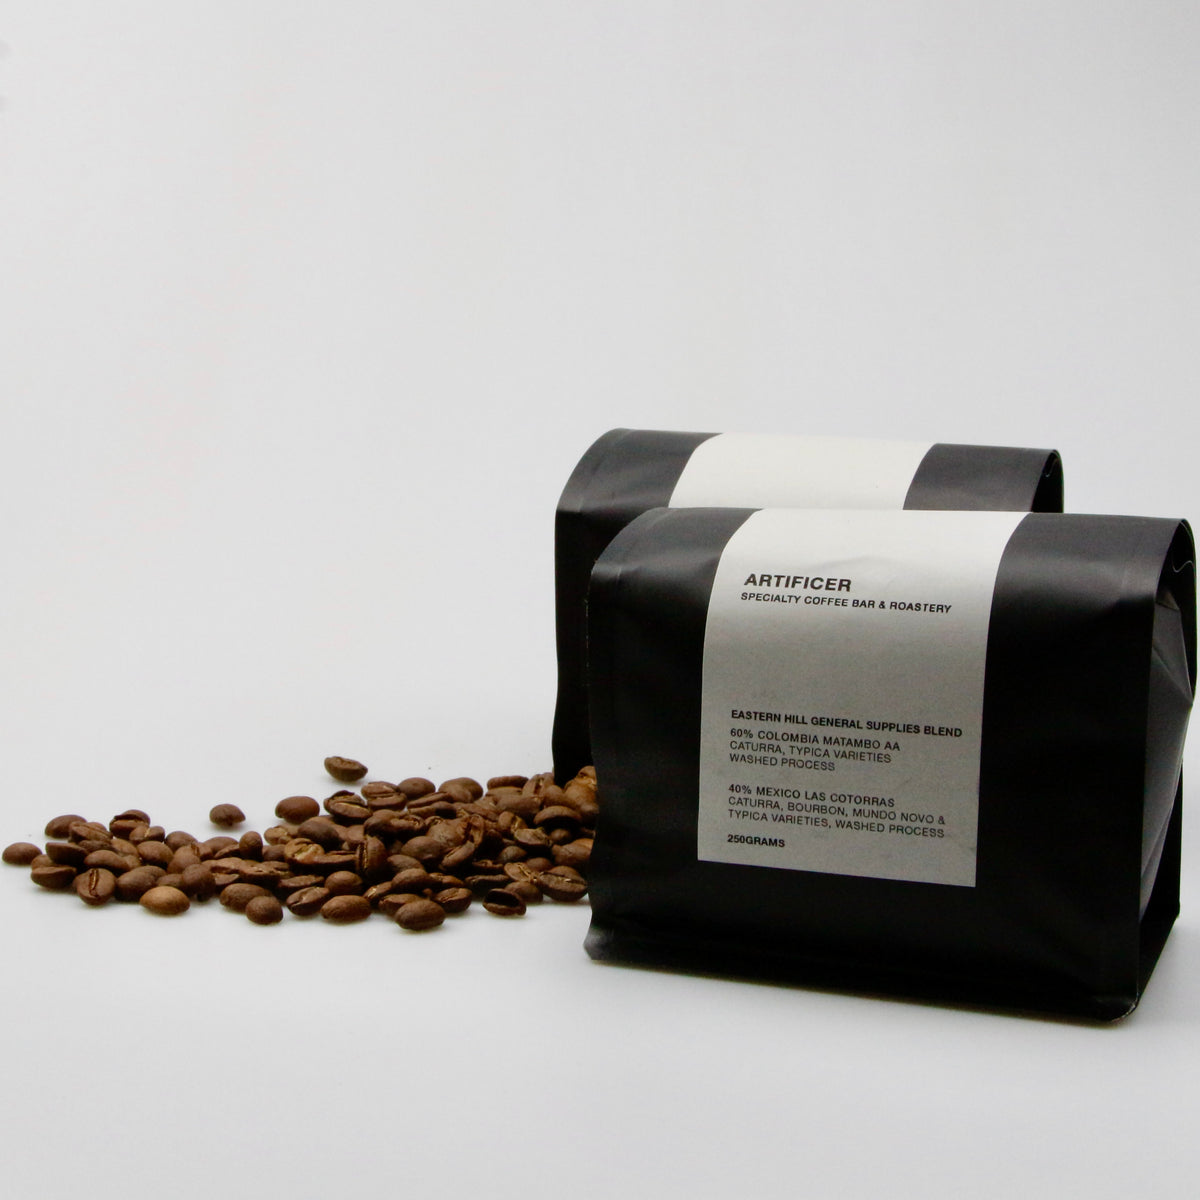 Artificer Coffee for Eastern Hill General Supplies Blend